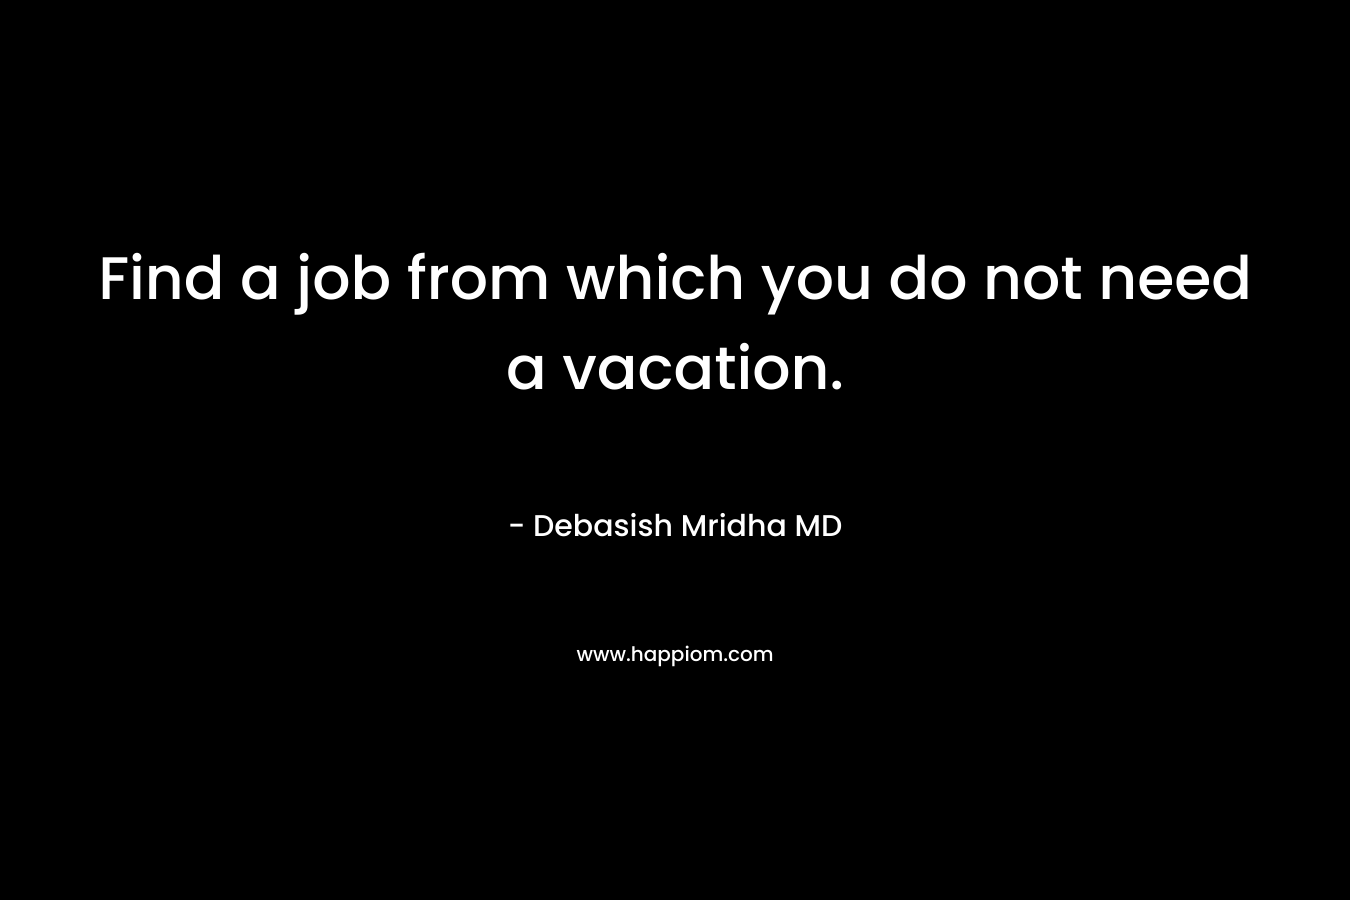 Find a job from which you do not need a vacation.